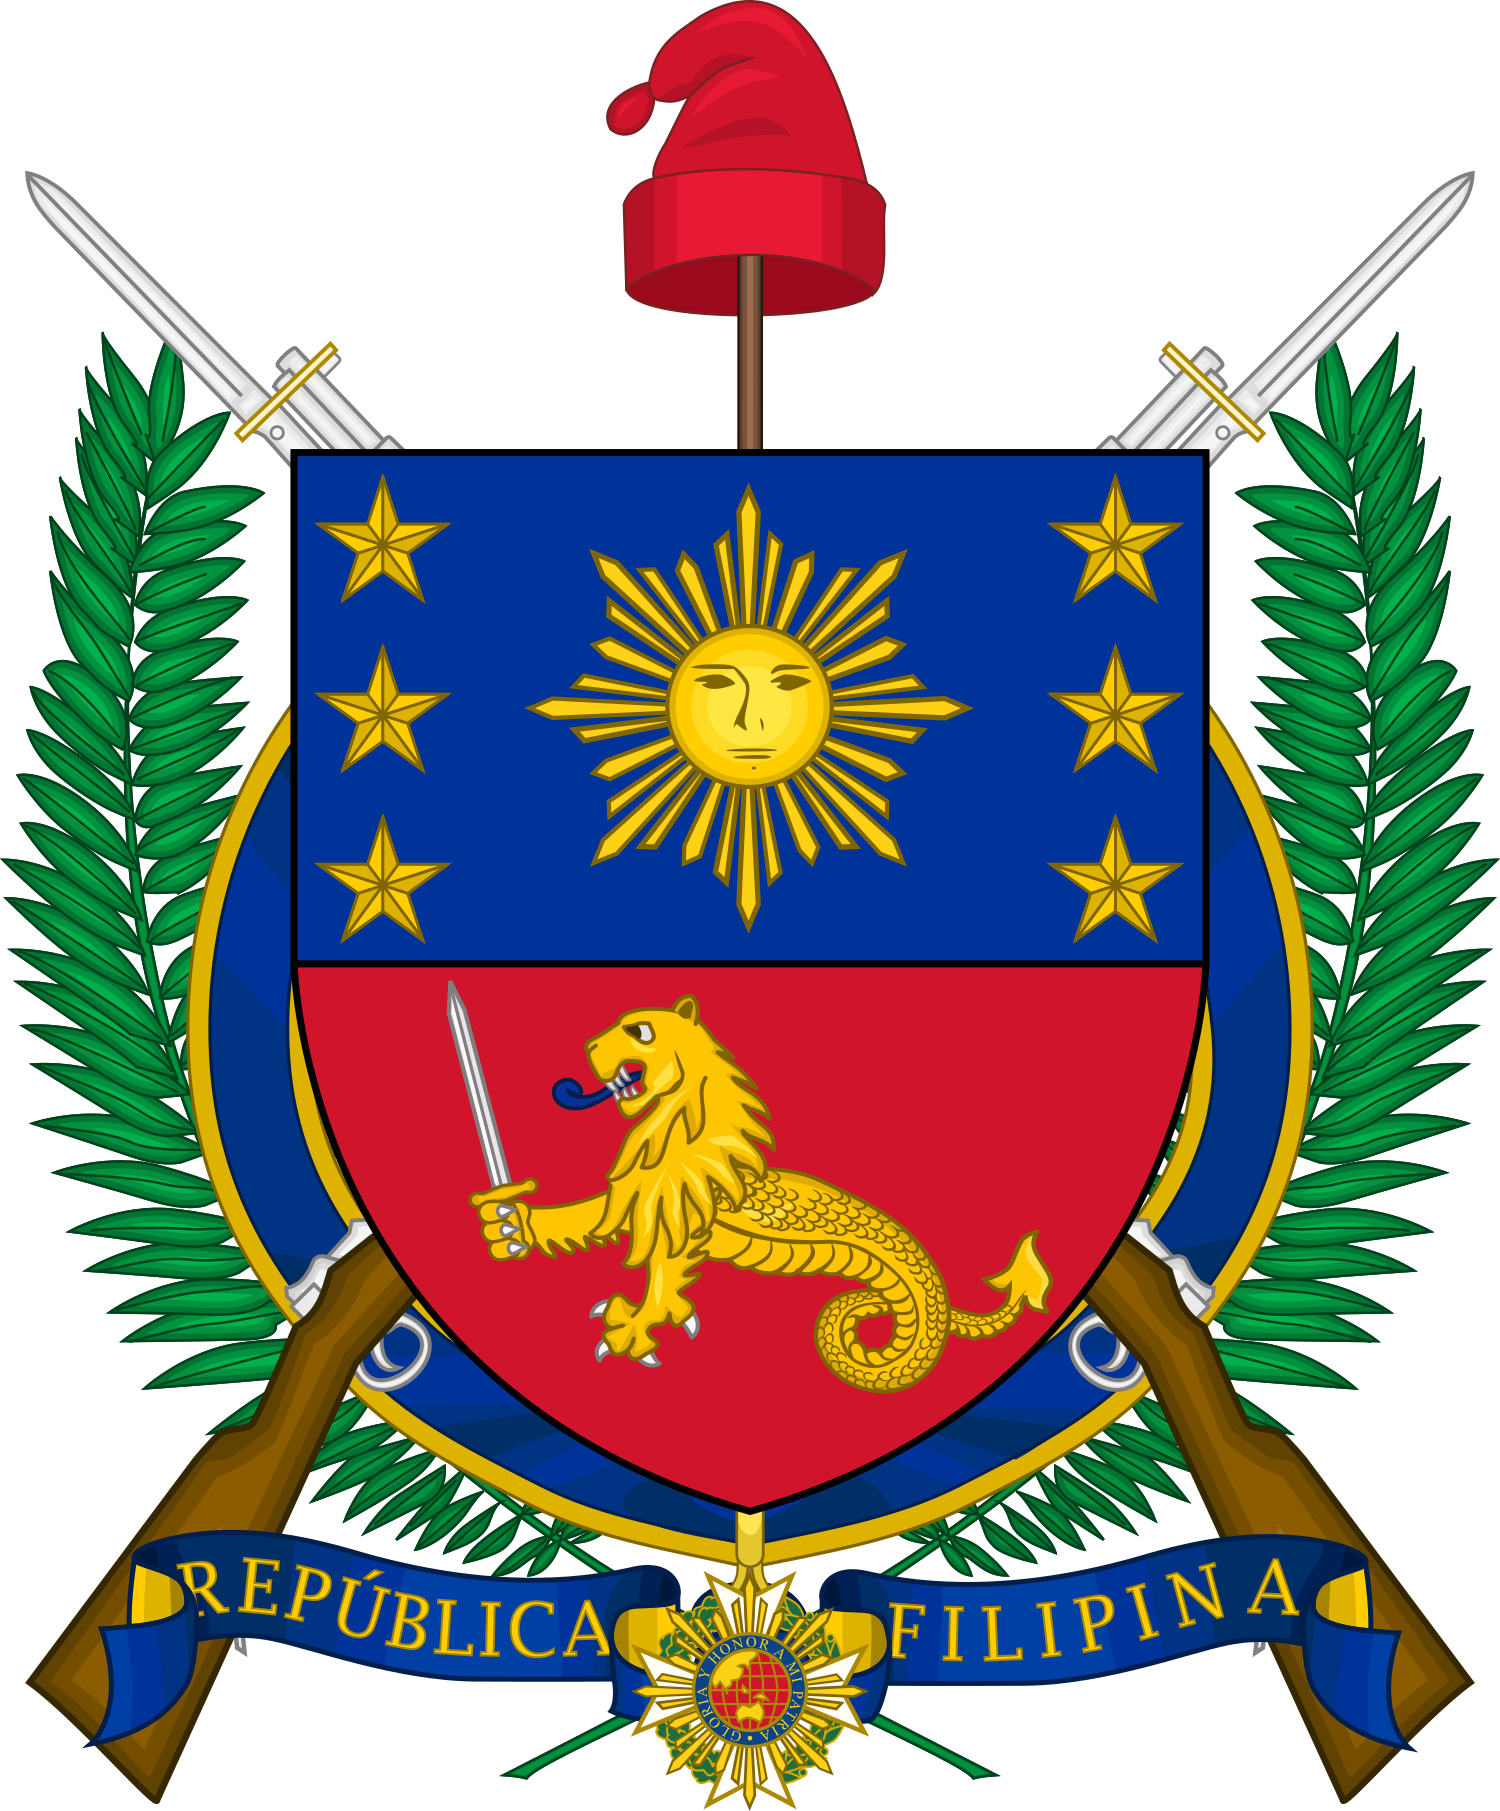 _philippine_republic__coat_of_arms_of_the_republic_by_ieph-dc0rspt.png